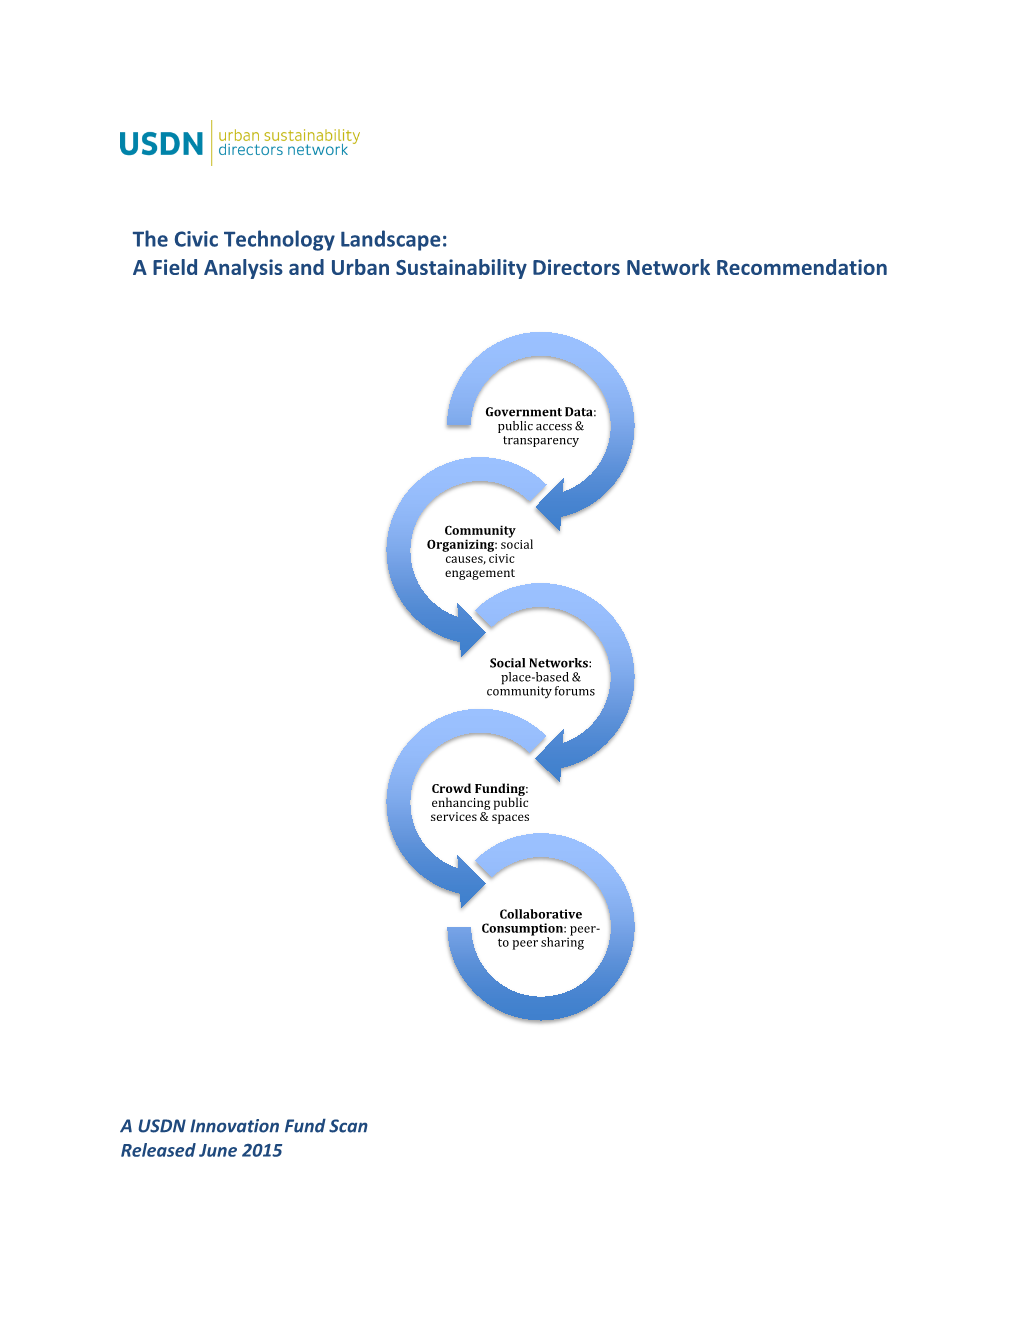 The Civic Technology Landscape: a Field Analysis and Urban Sustainability Directors Network Recommendation